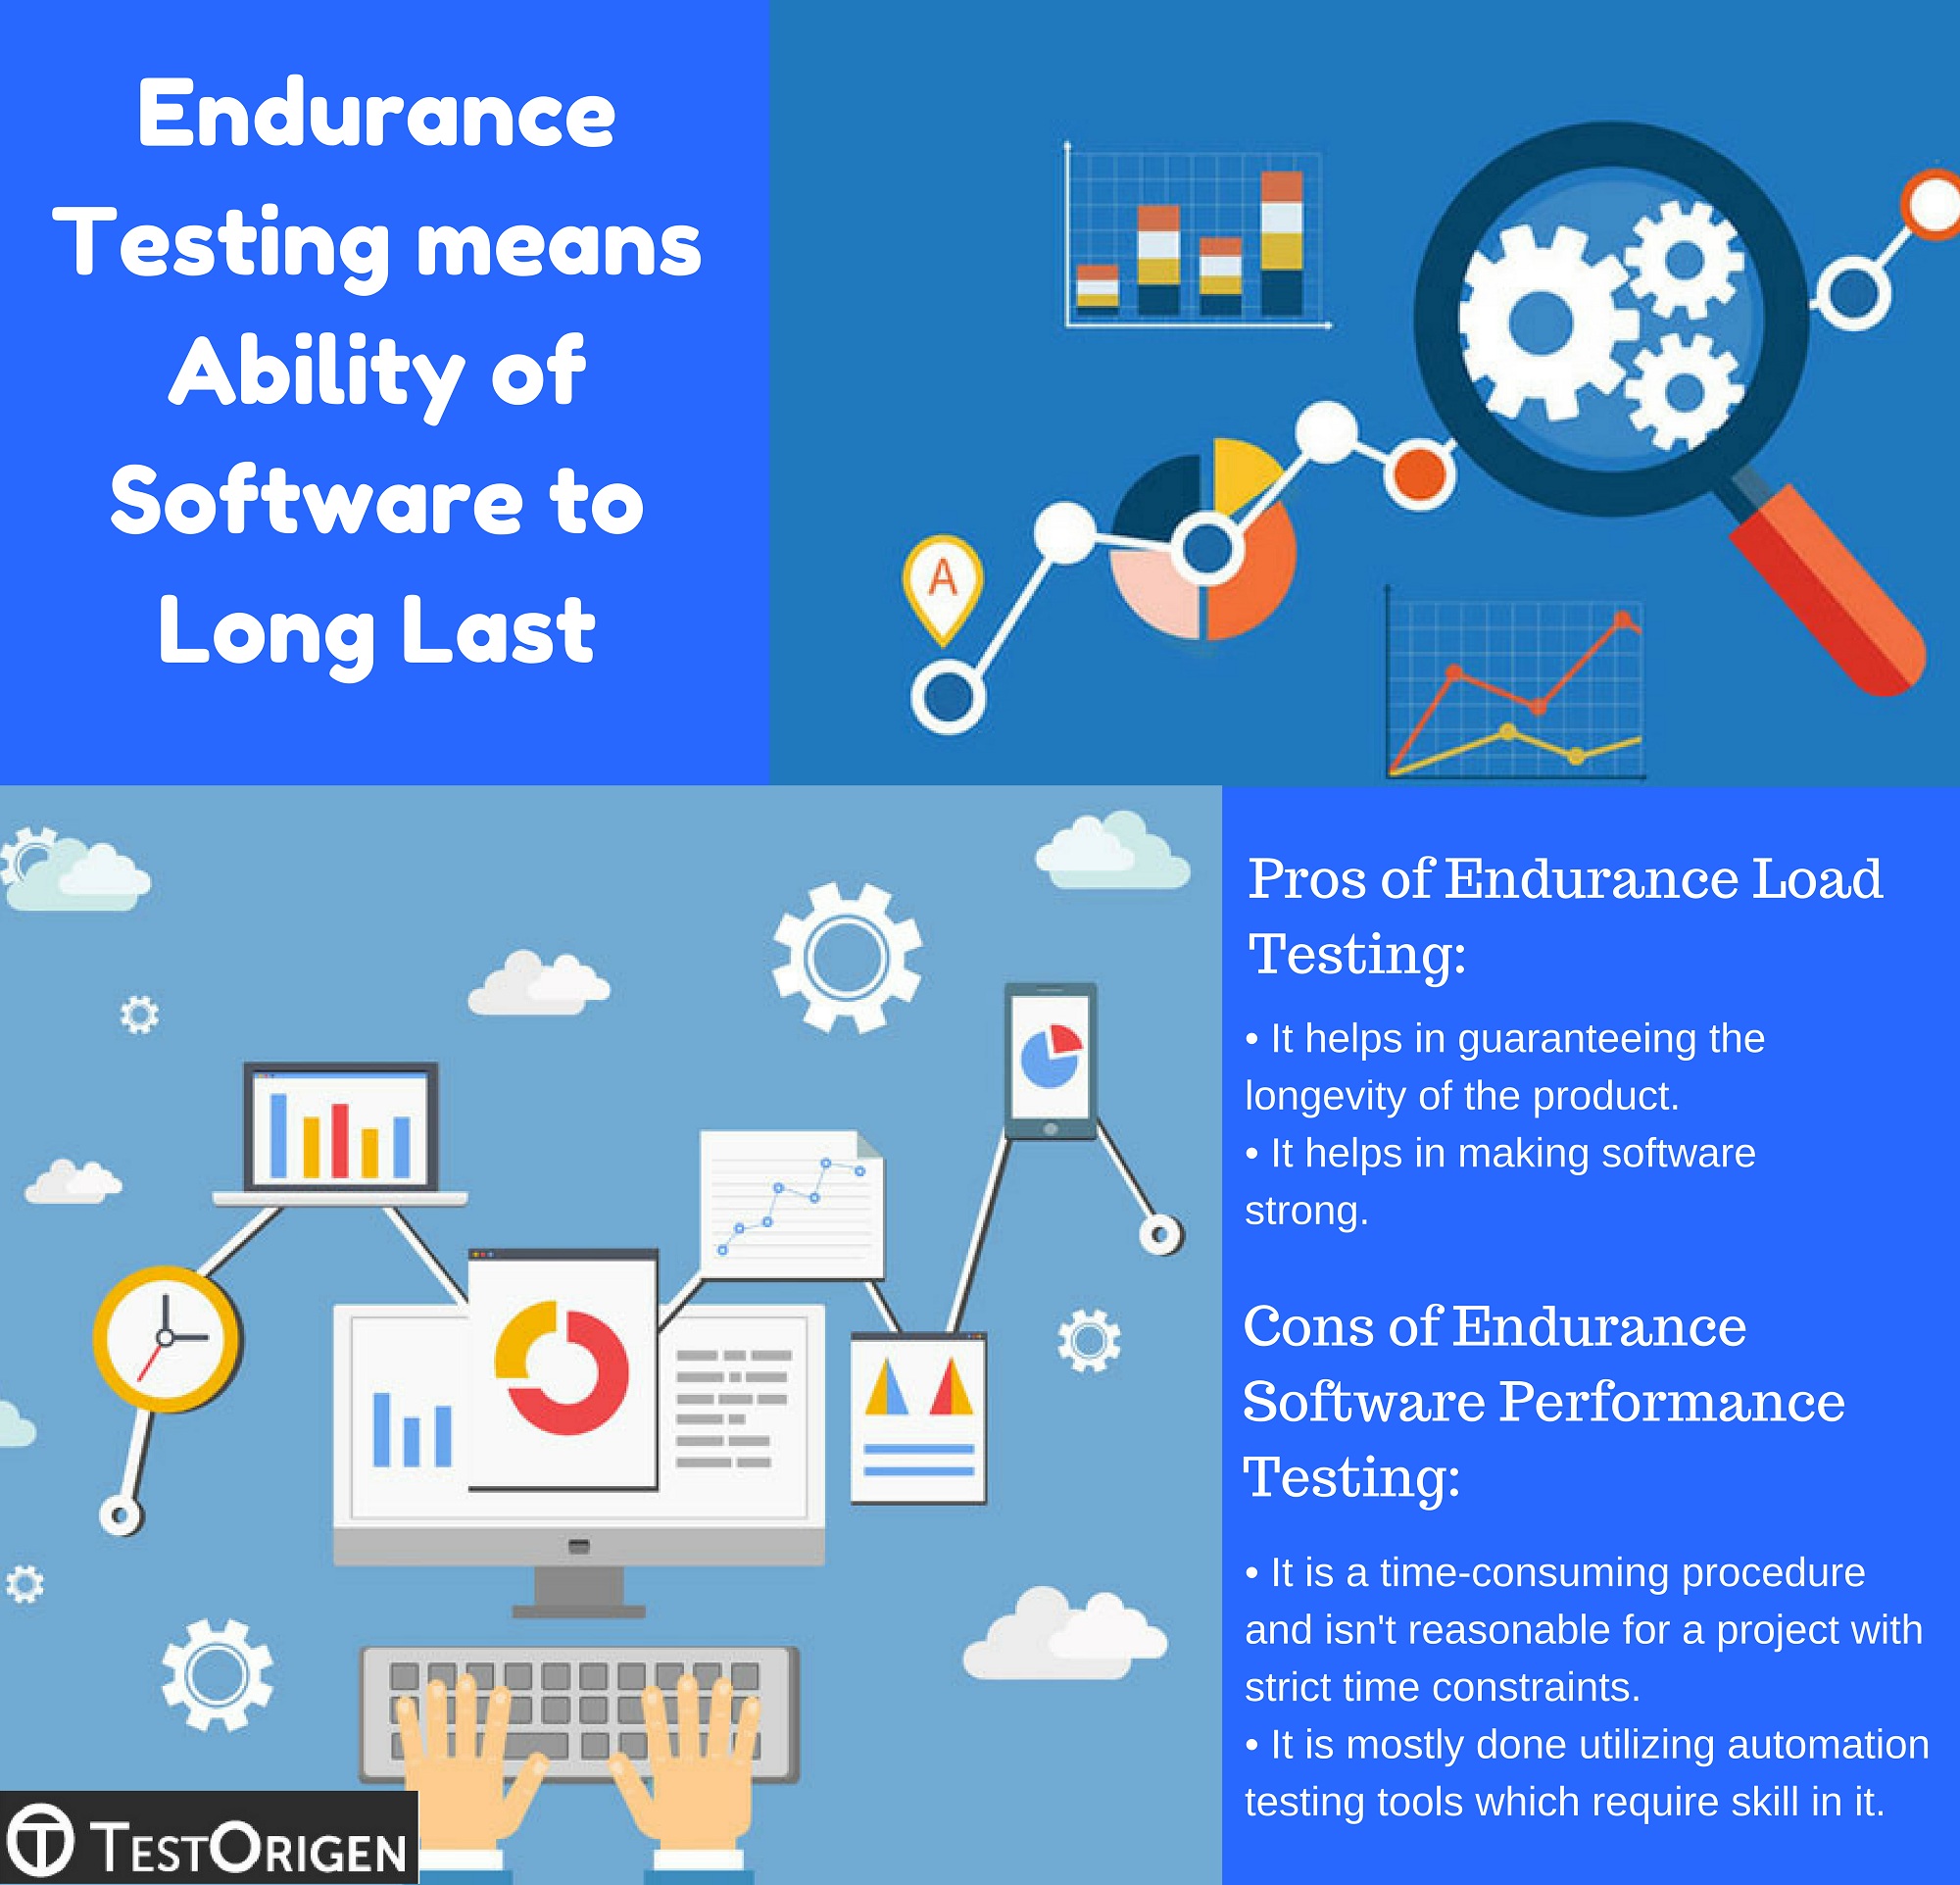 Endurance Testing means Ability of Software to Long Last